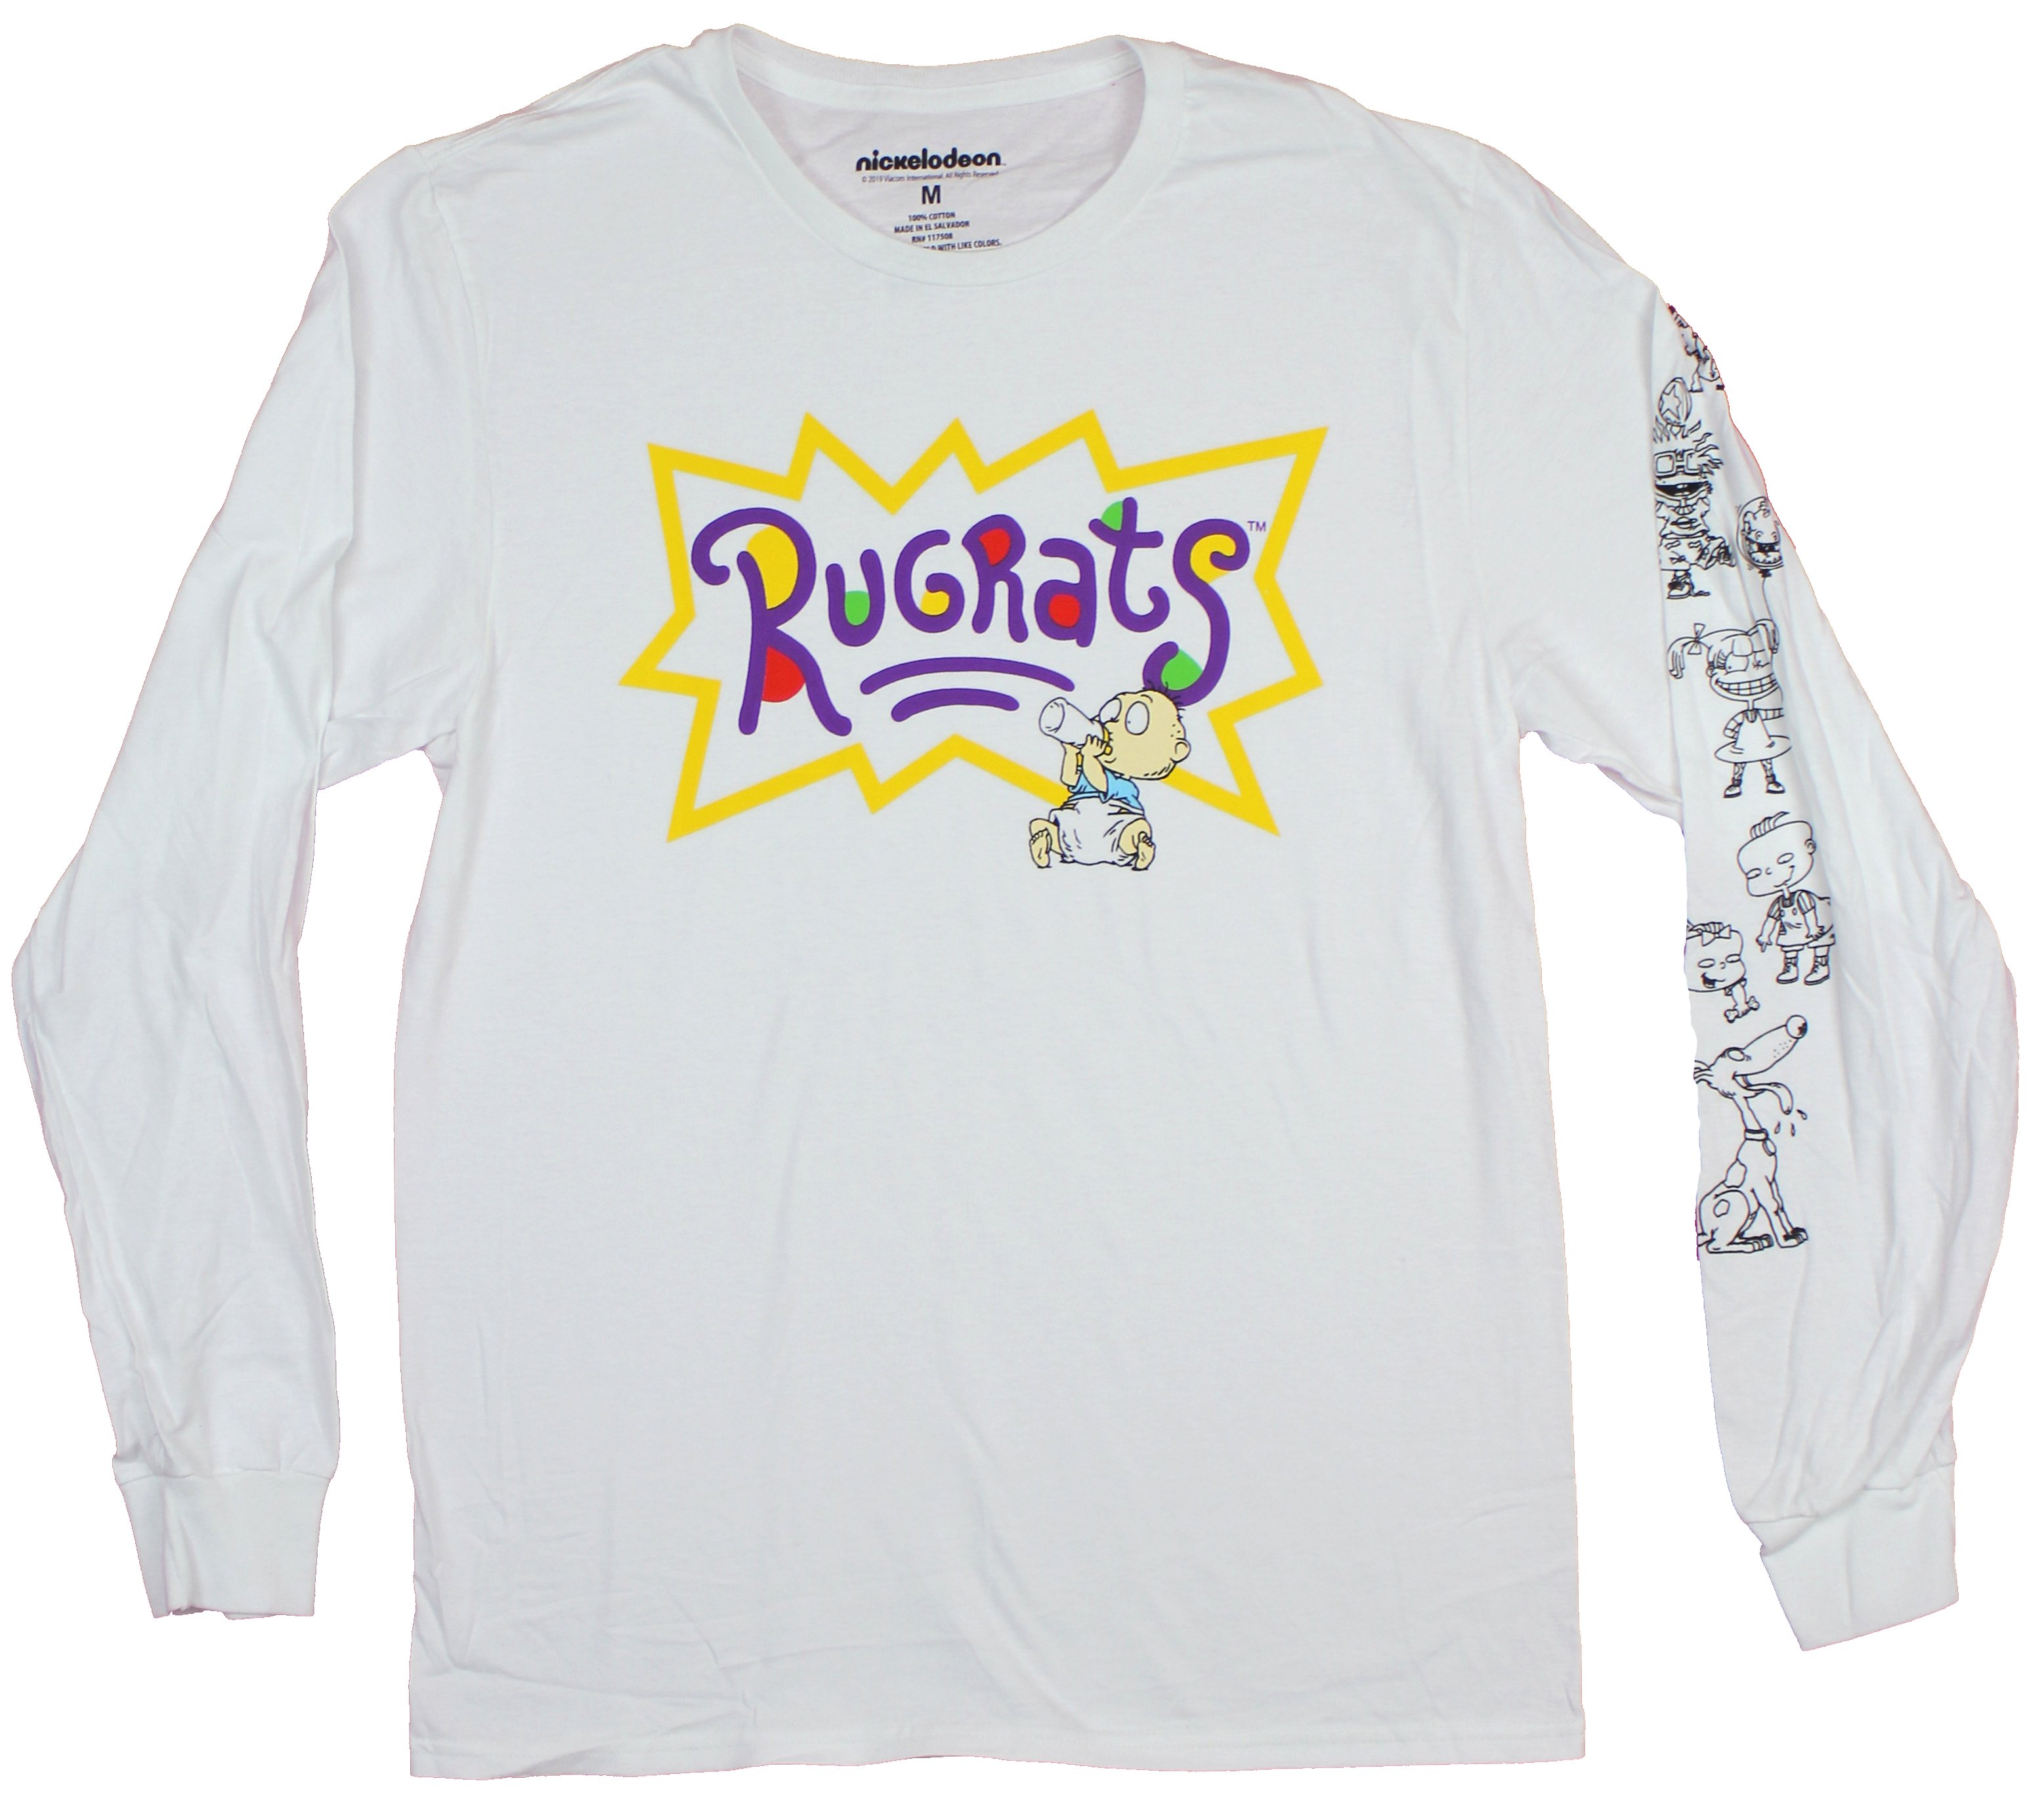 tommy pickles t shirt